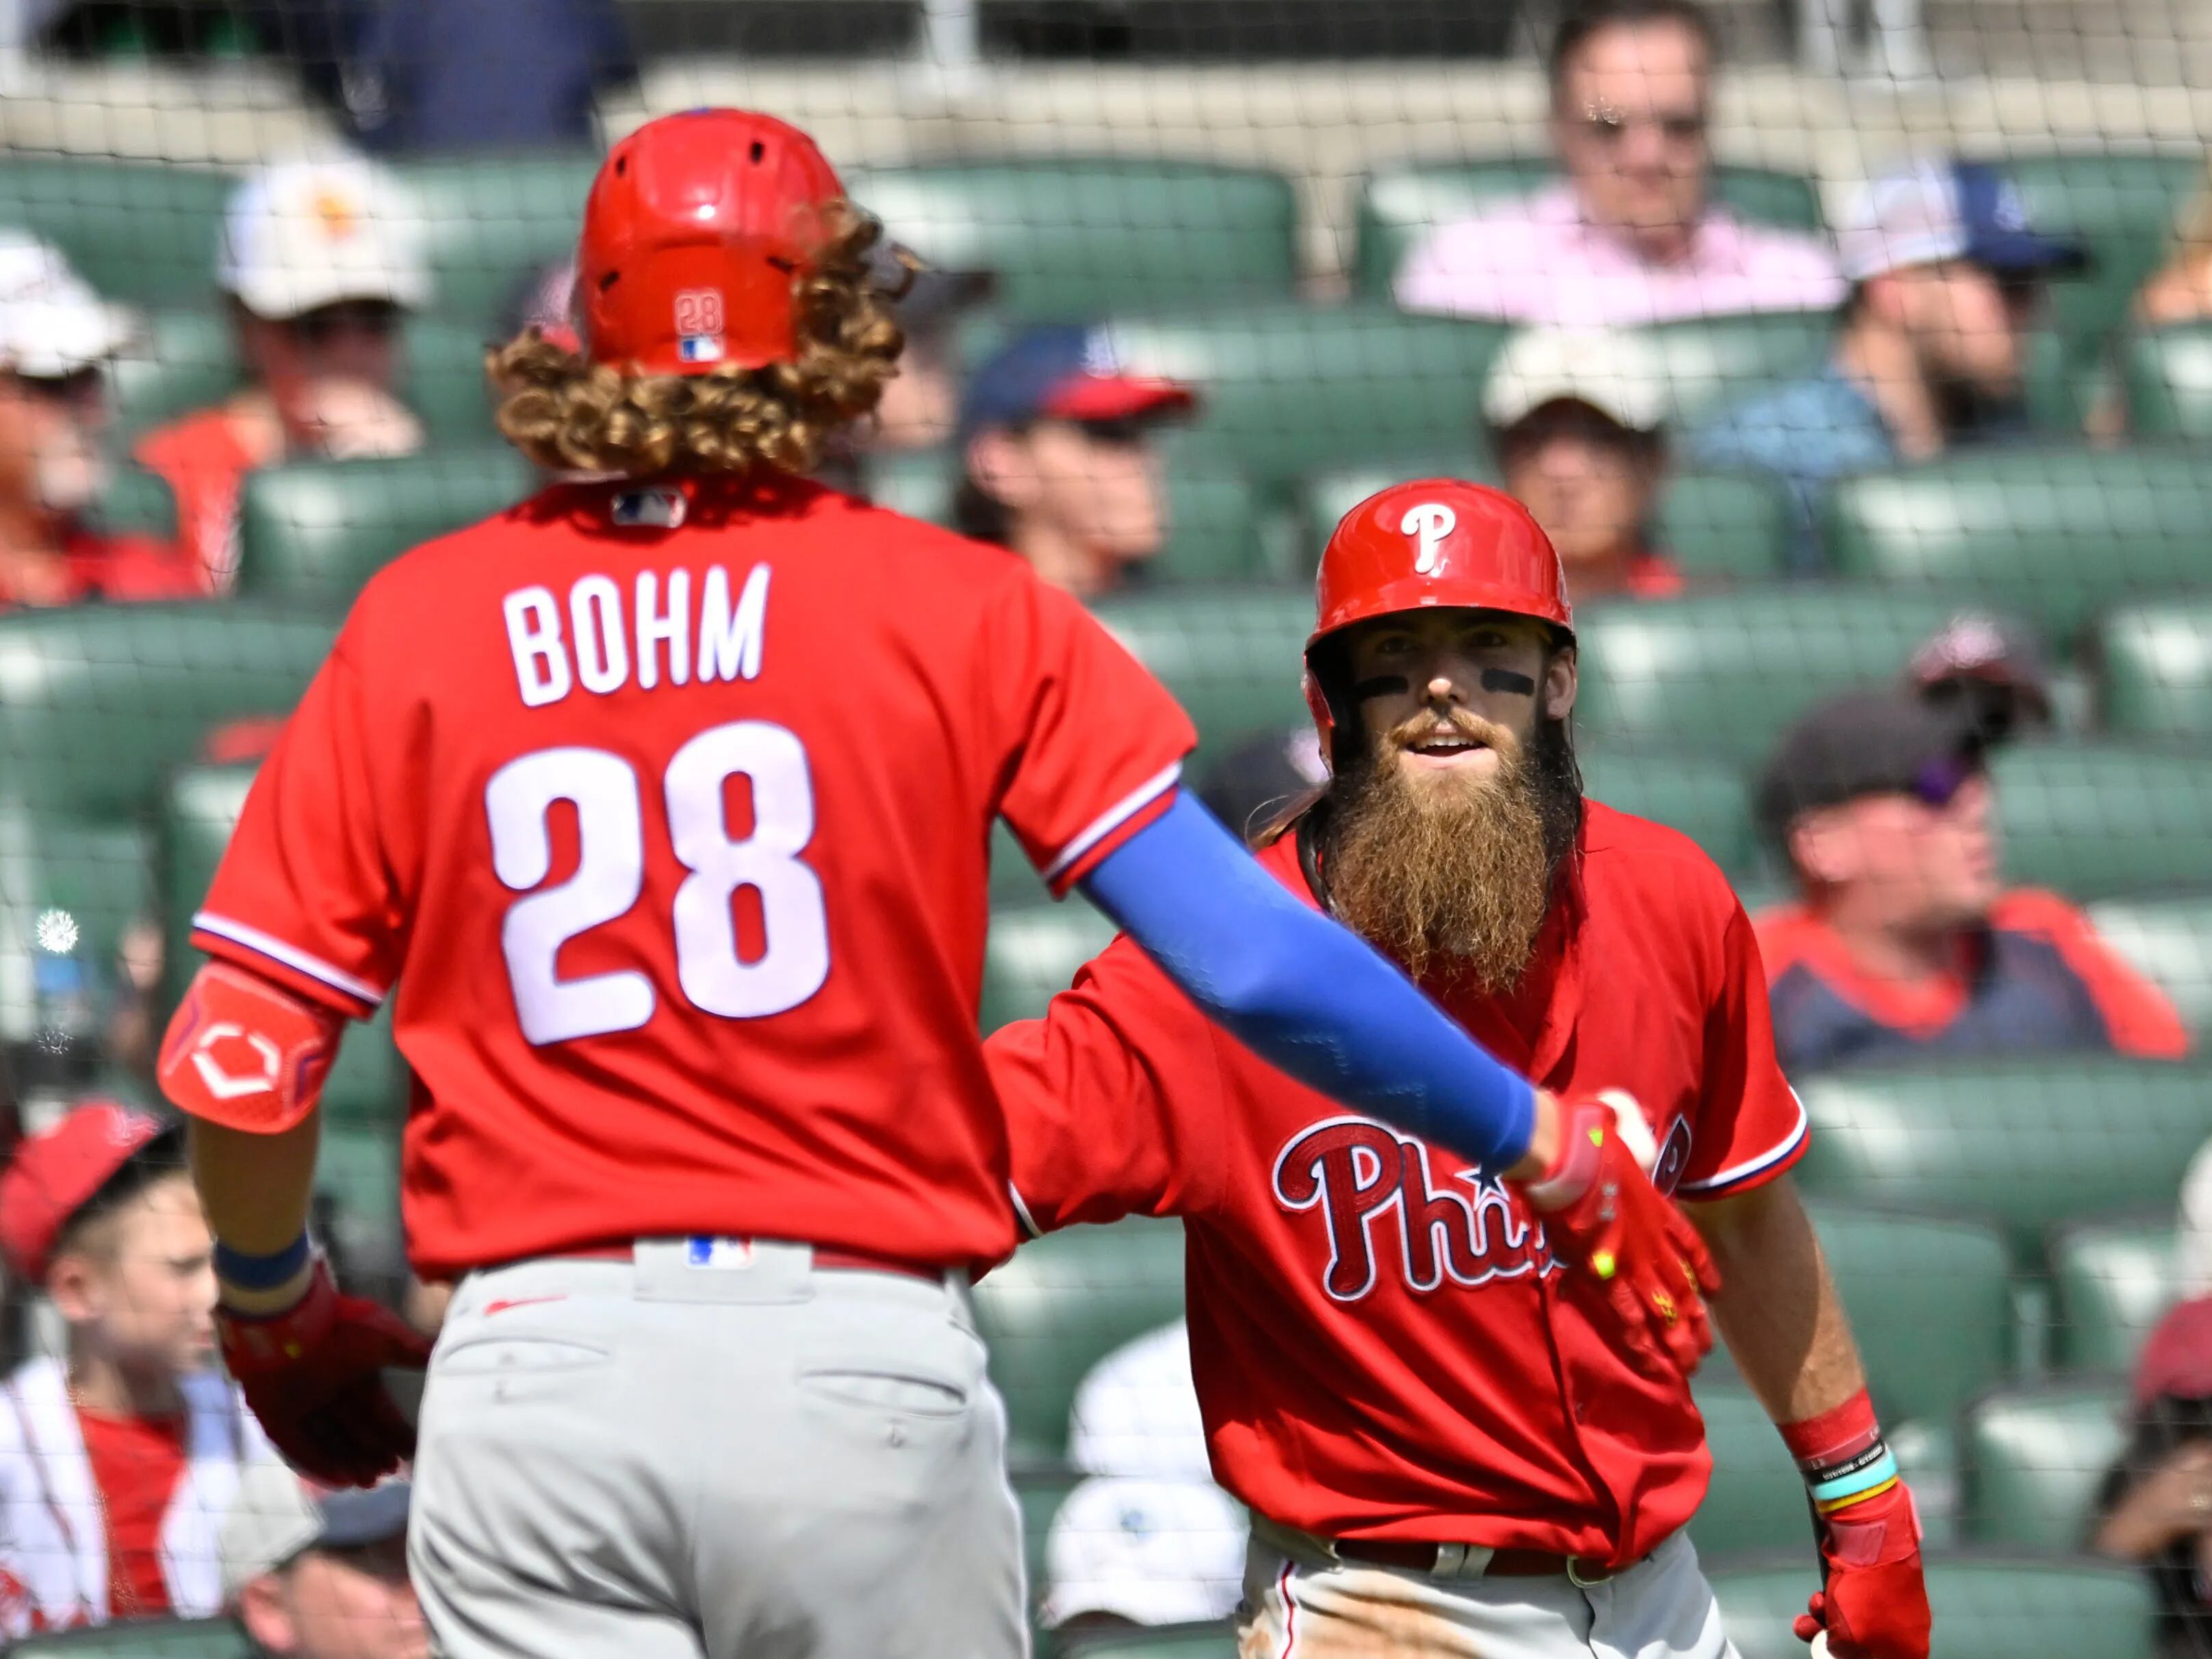 Phillies manage only four hits as Braves complete sweep, 5-2